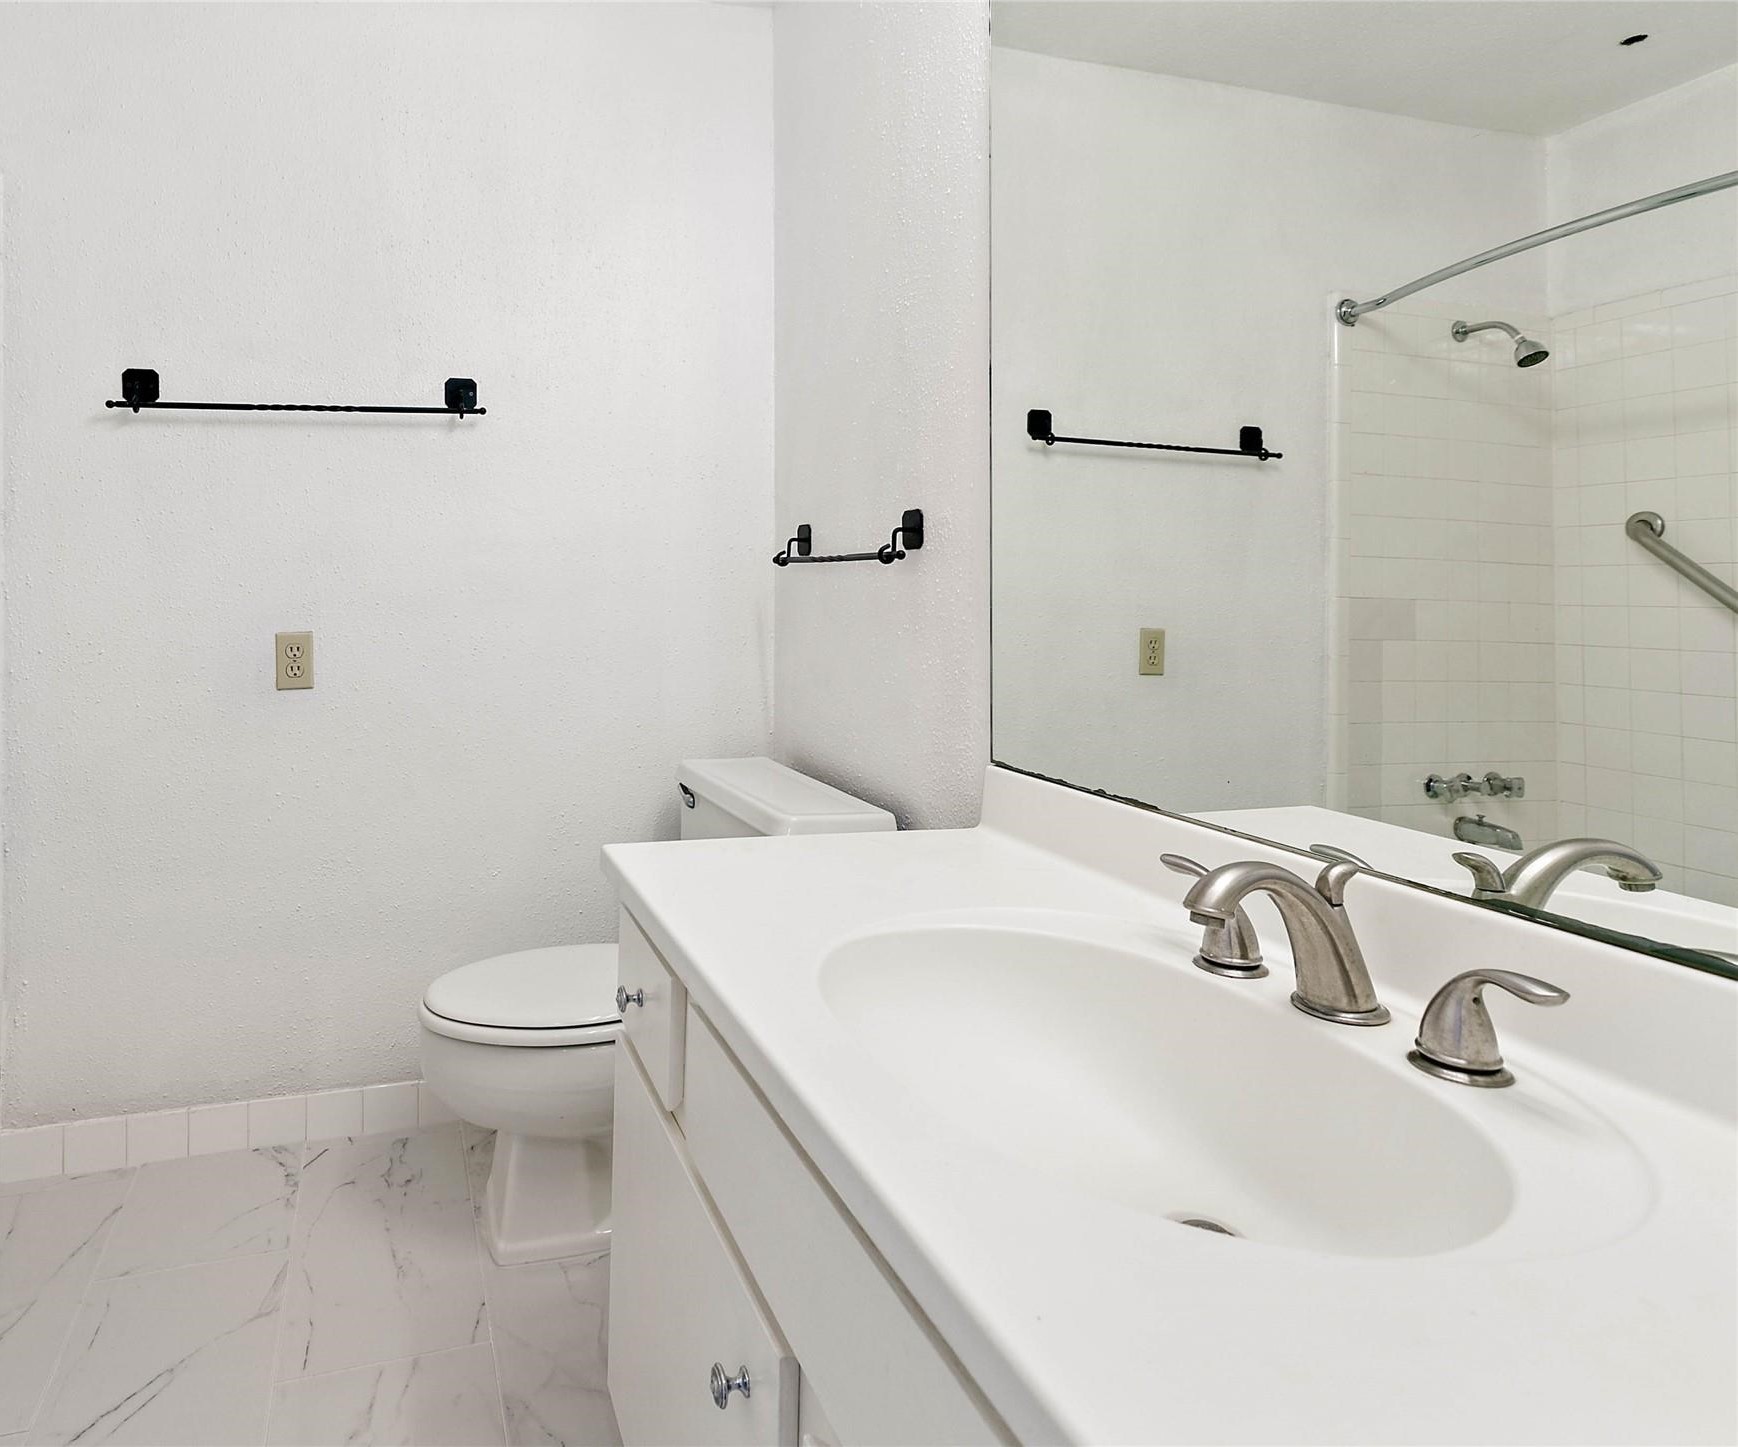 A second full, ensuite bath with a shower/tub combo is located upstairs.